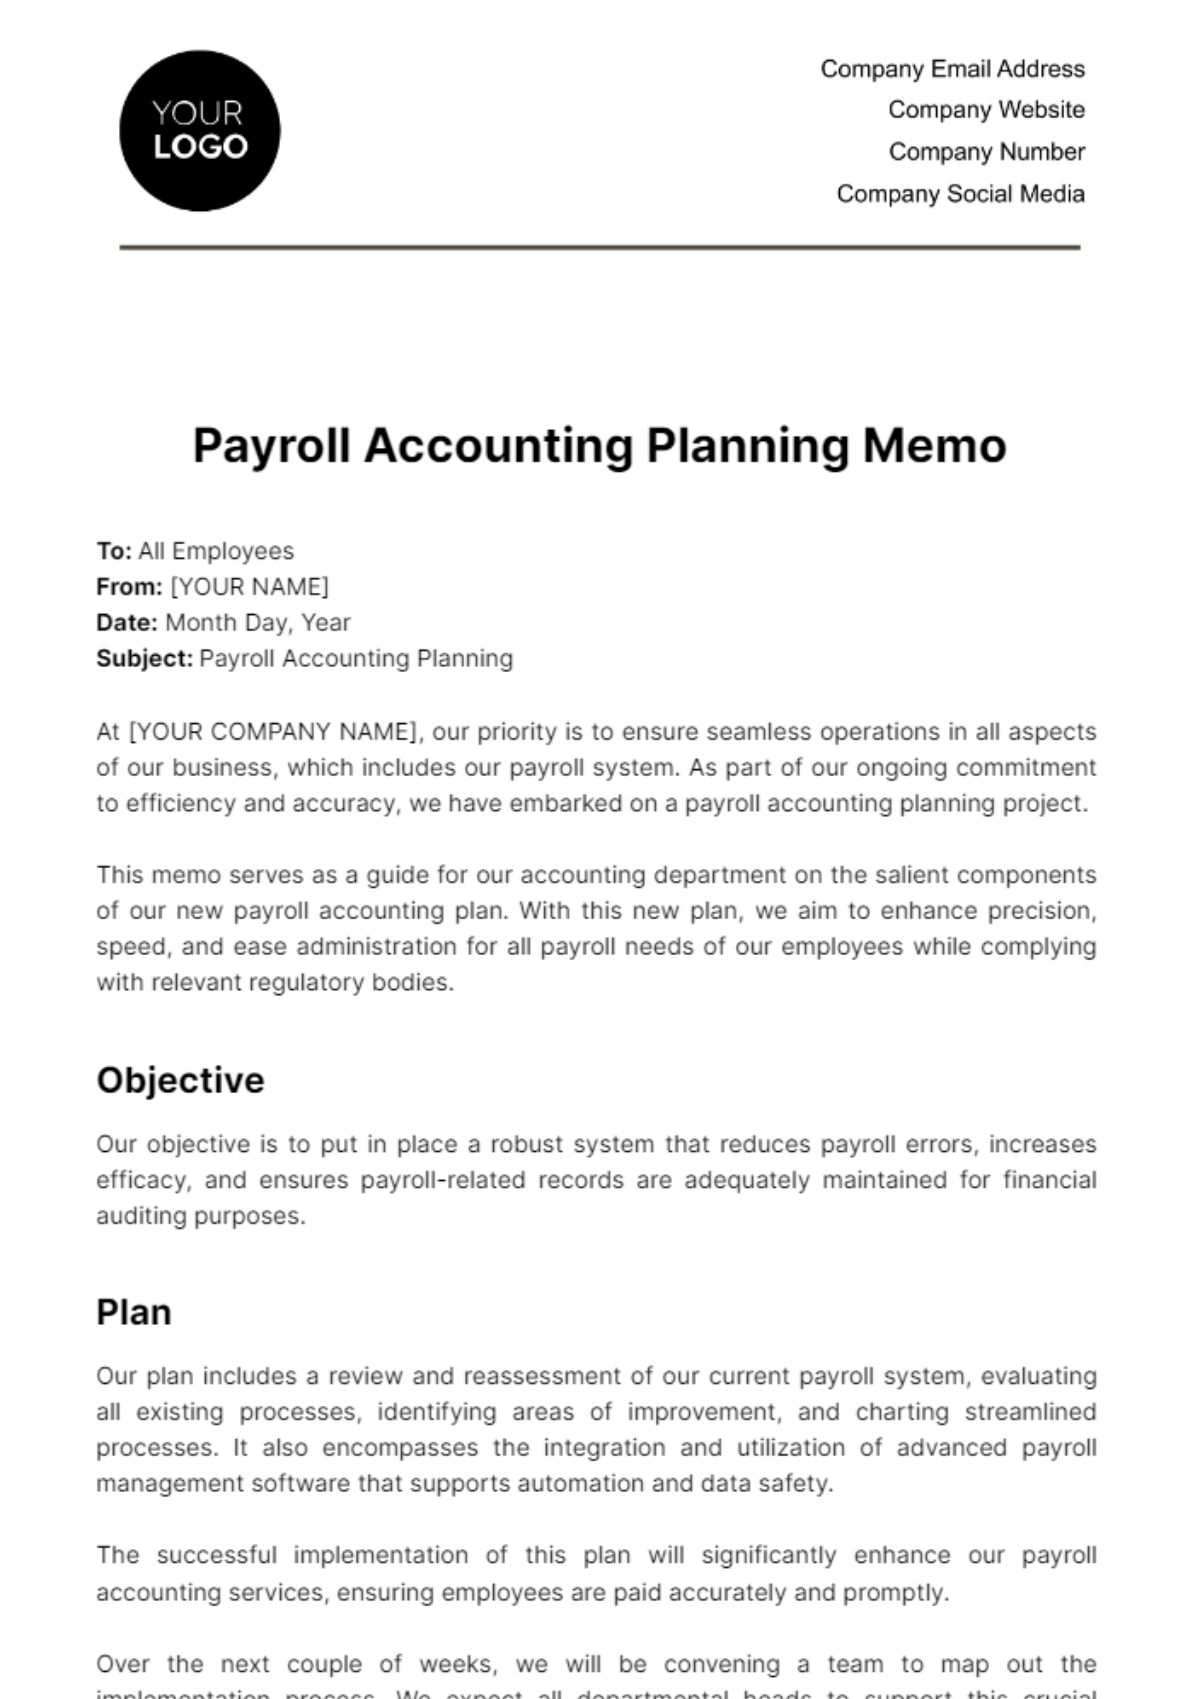 Free Payroll Accounting Planning Memo Template